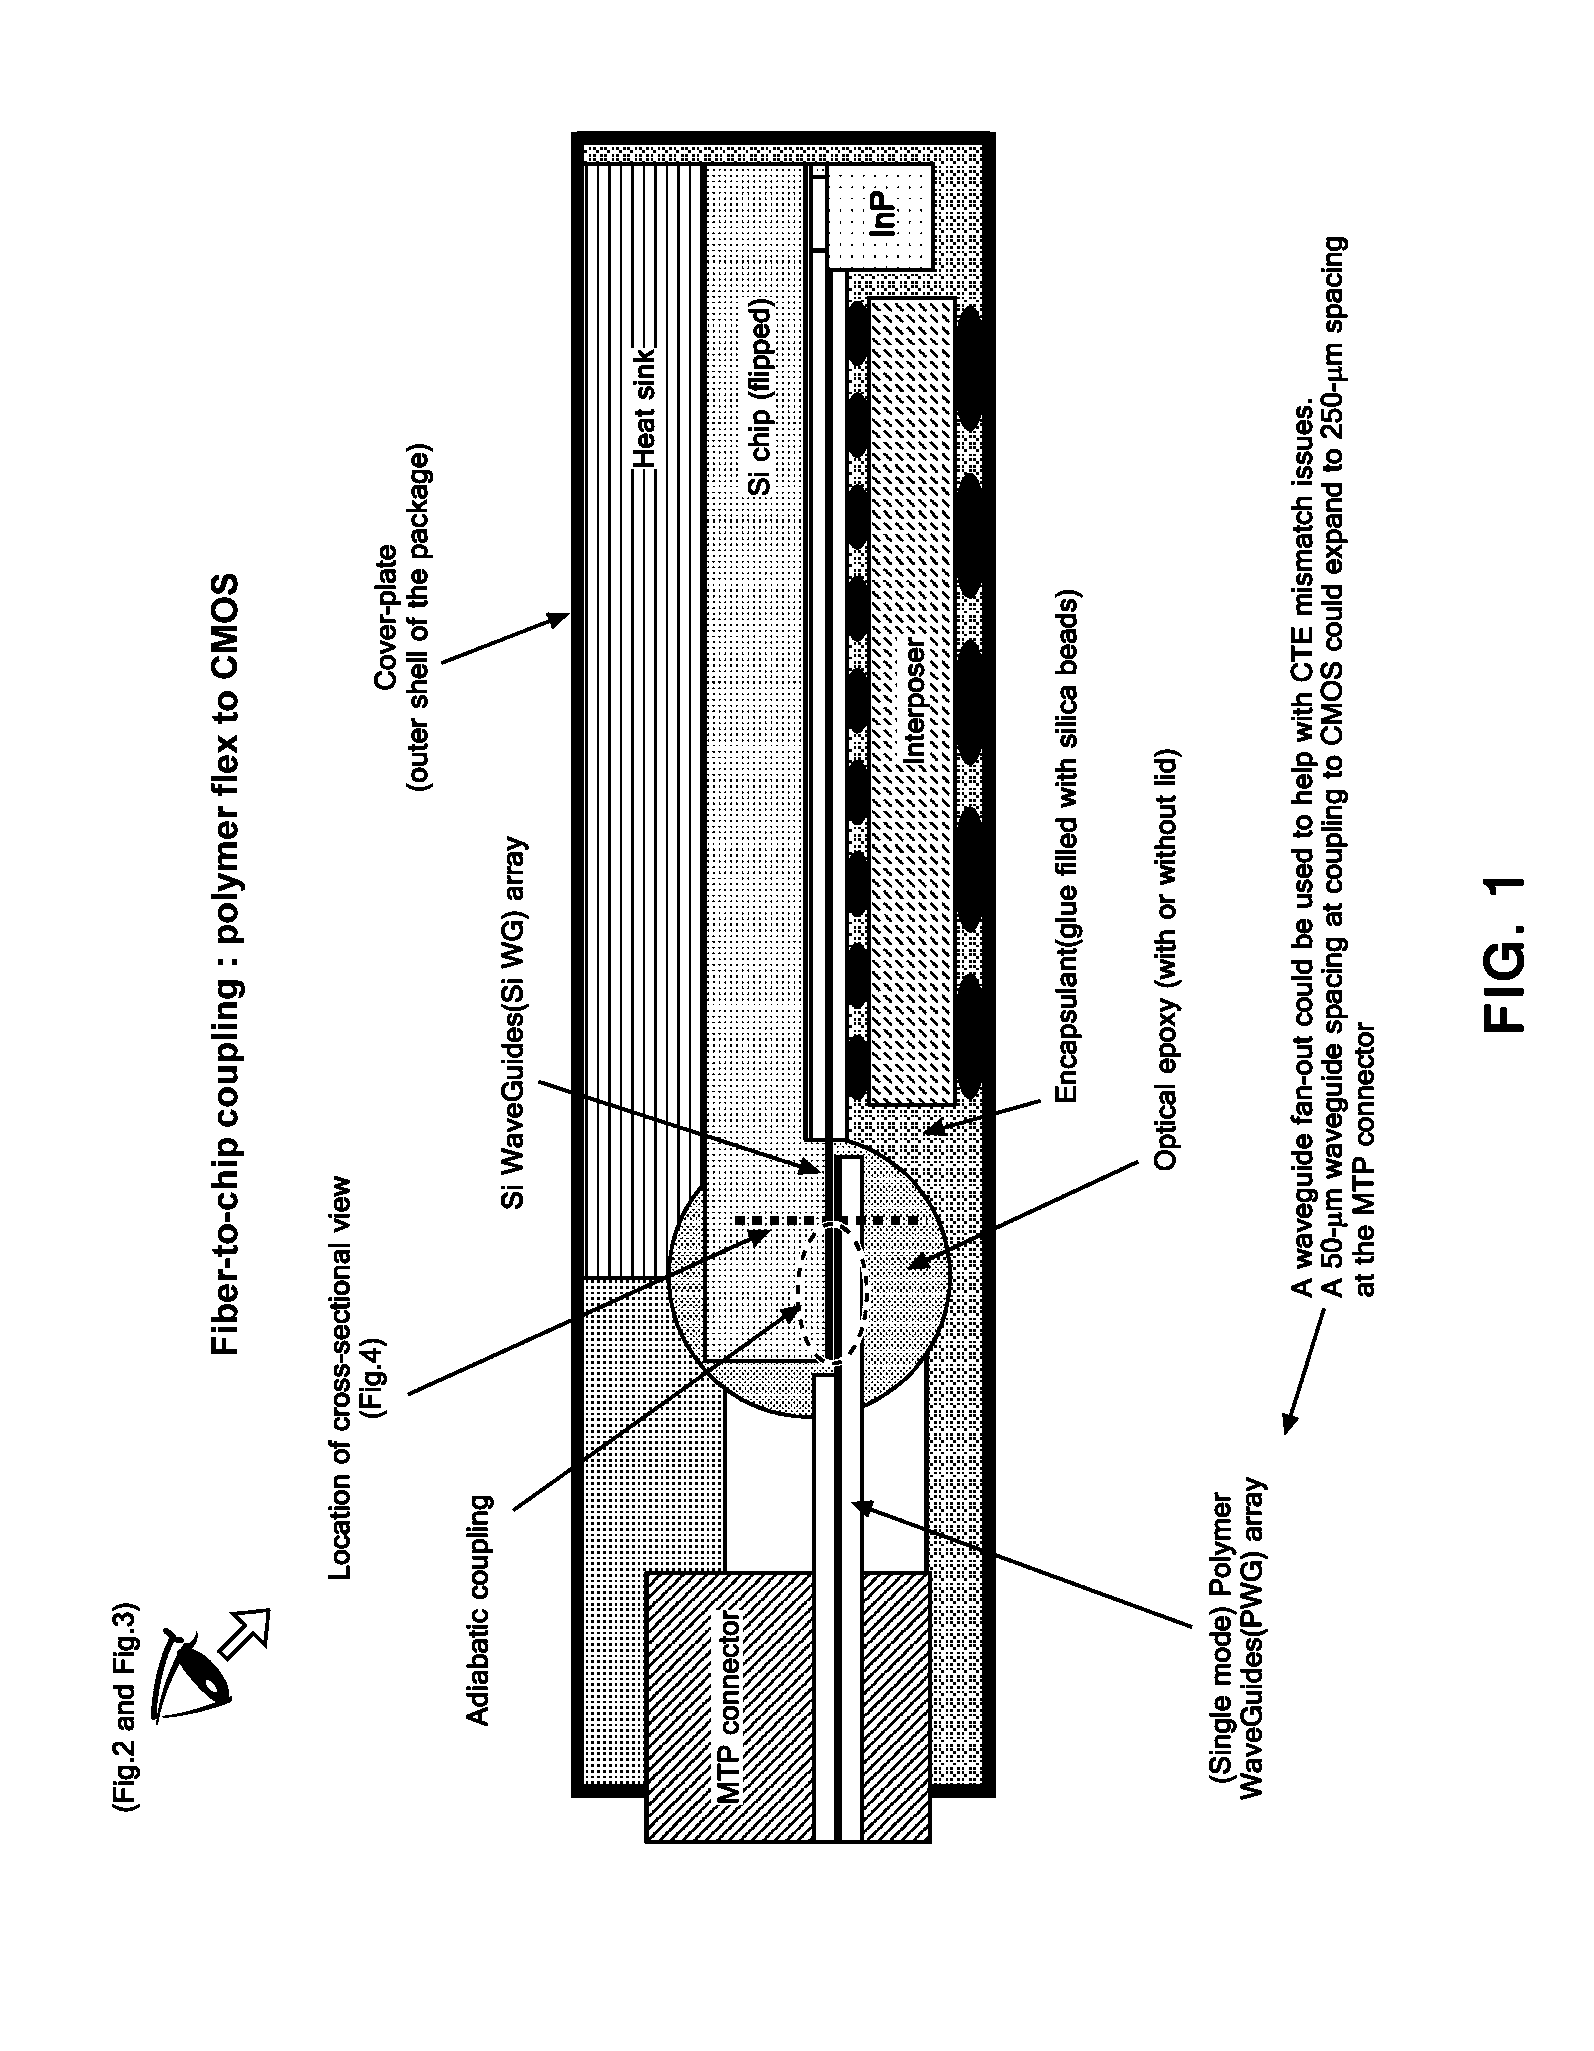 ALIGNMENT OF SINGLE-MODE POLYMER WAVEGUIDE (PWG) ARRAY AND SILICON WAVEGUIDE (SiWG) ARRAY FOR PROVIDING ADIABATIC COUPLING